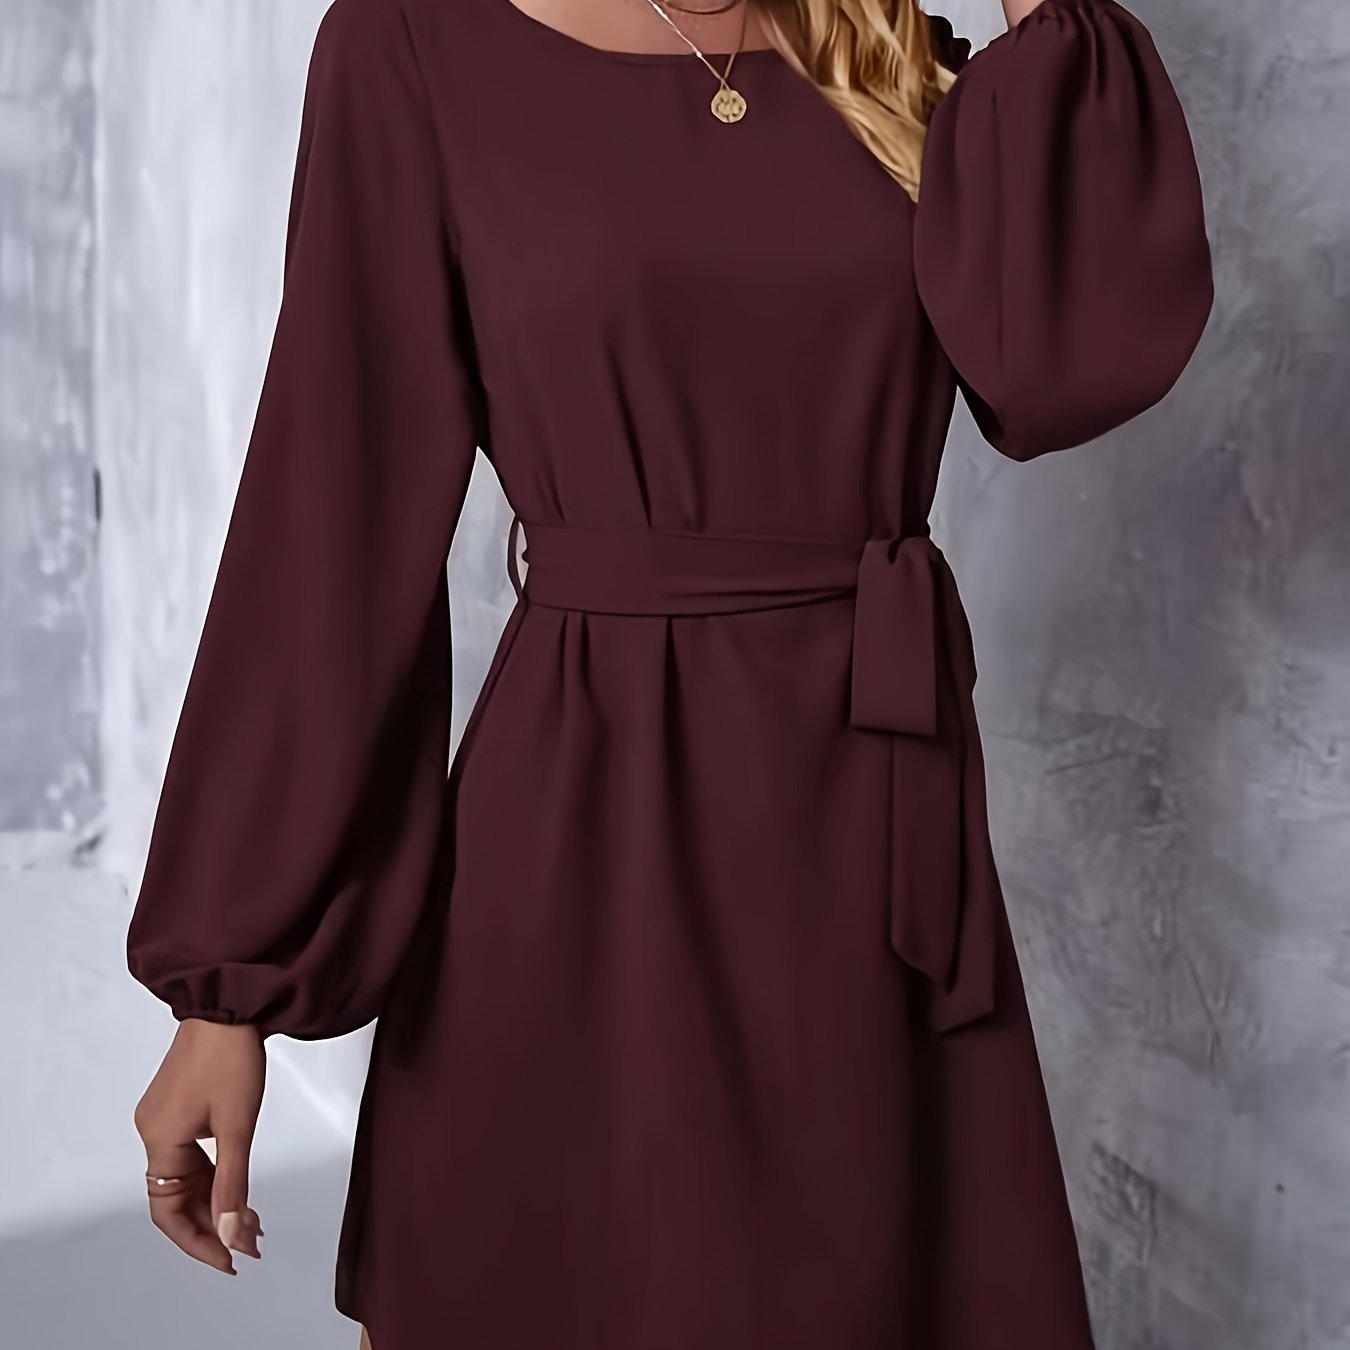 belted solid color dress casual long sleeve dress for spring fall womens clothing